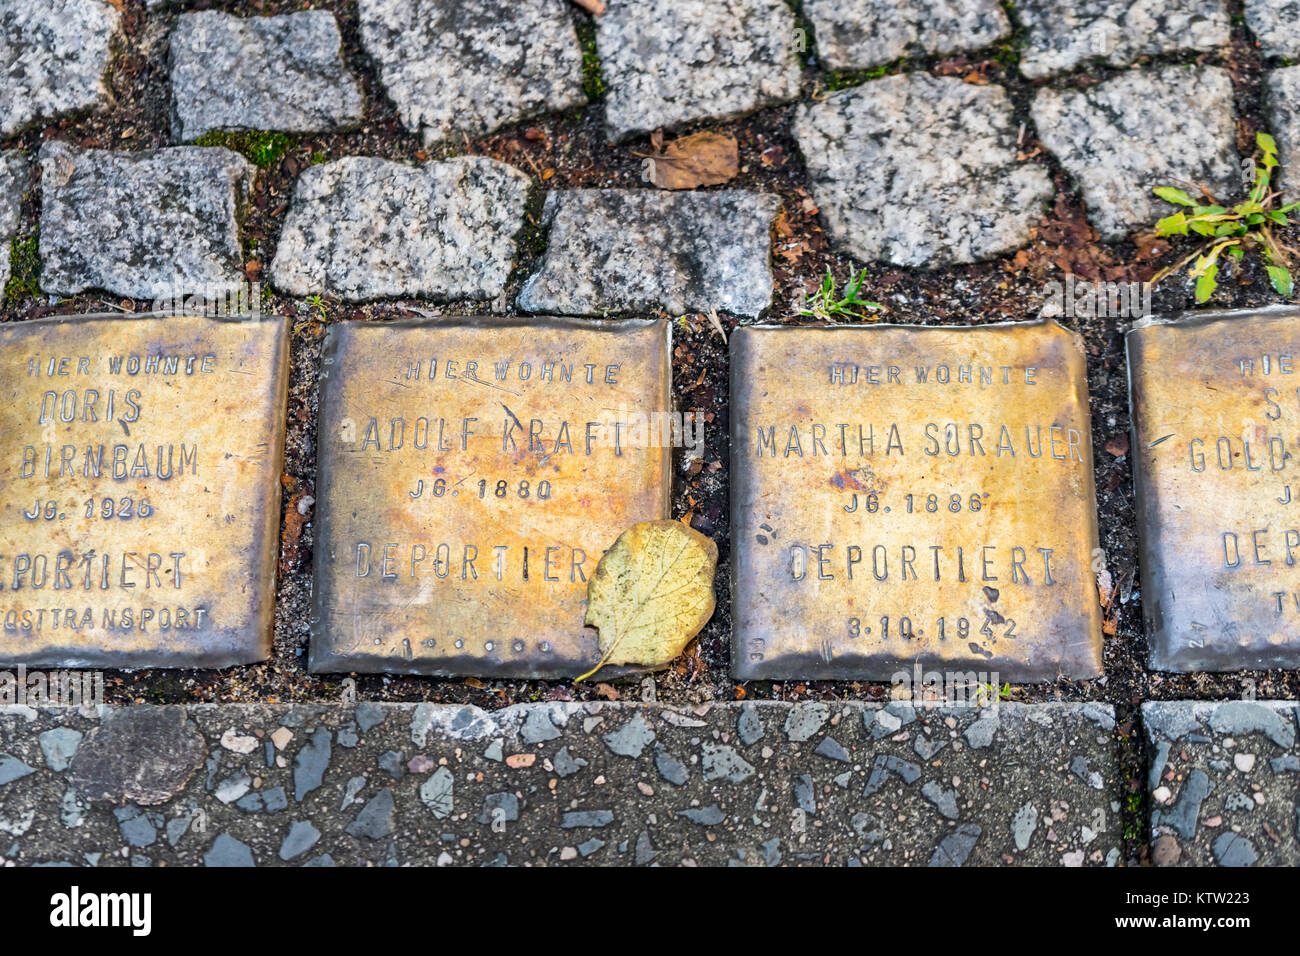 Stolpersteine (memorial stones) in a street in Berlin to commemorate the victims of the Nazi extermination camps - mainly Jews - in Berlin, Germany Stock Photo